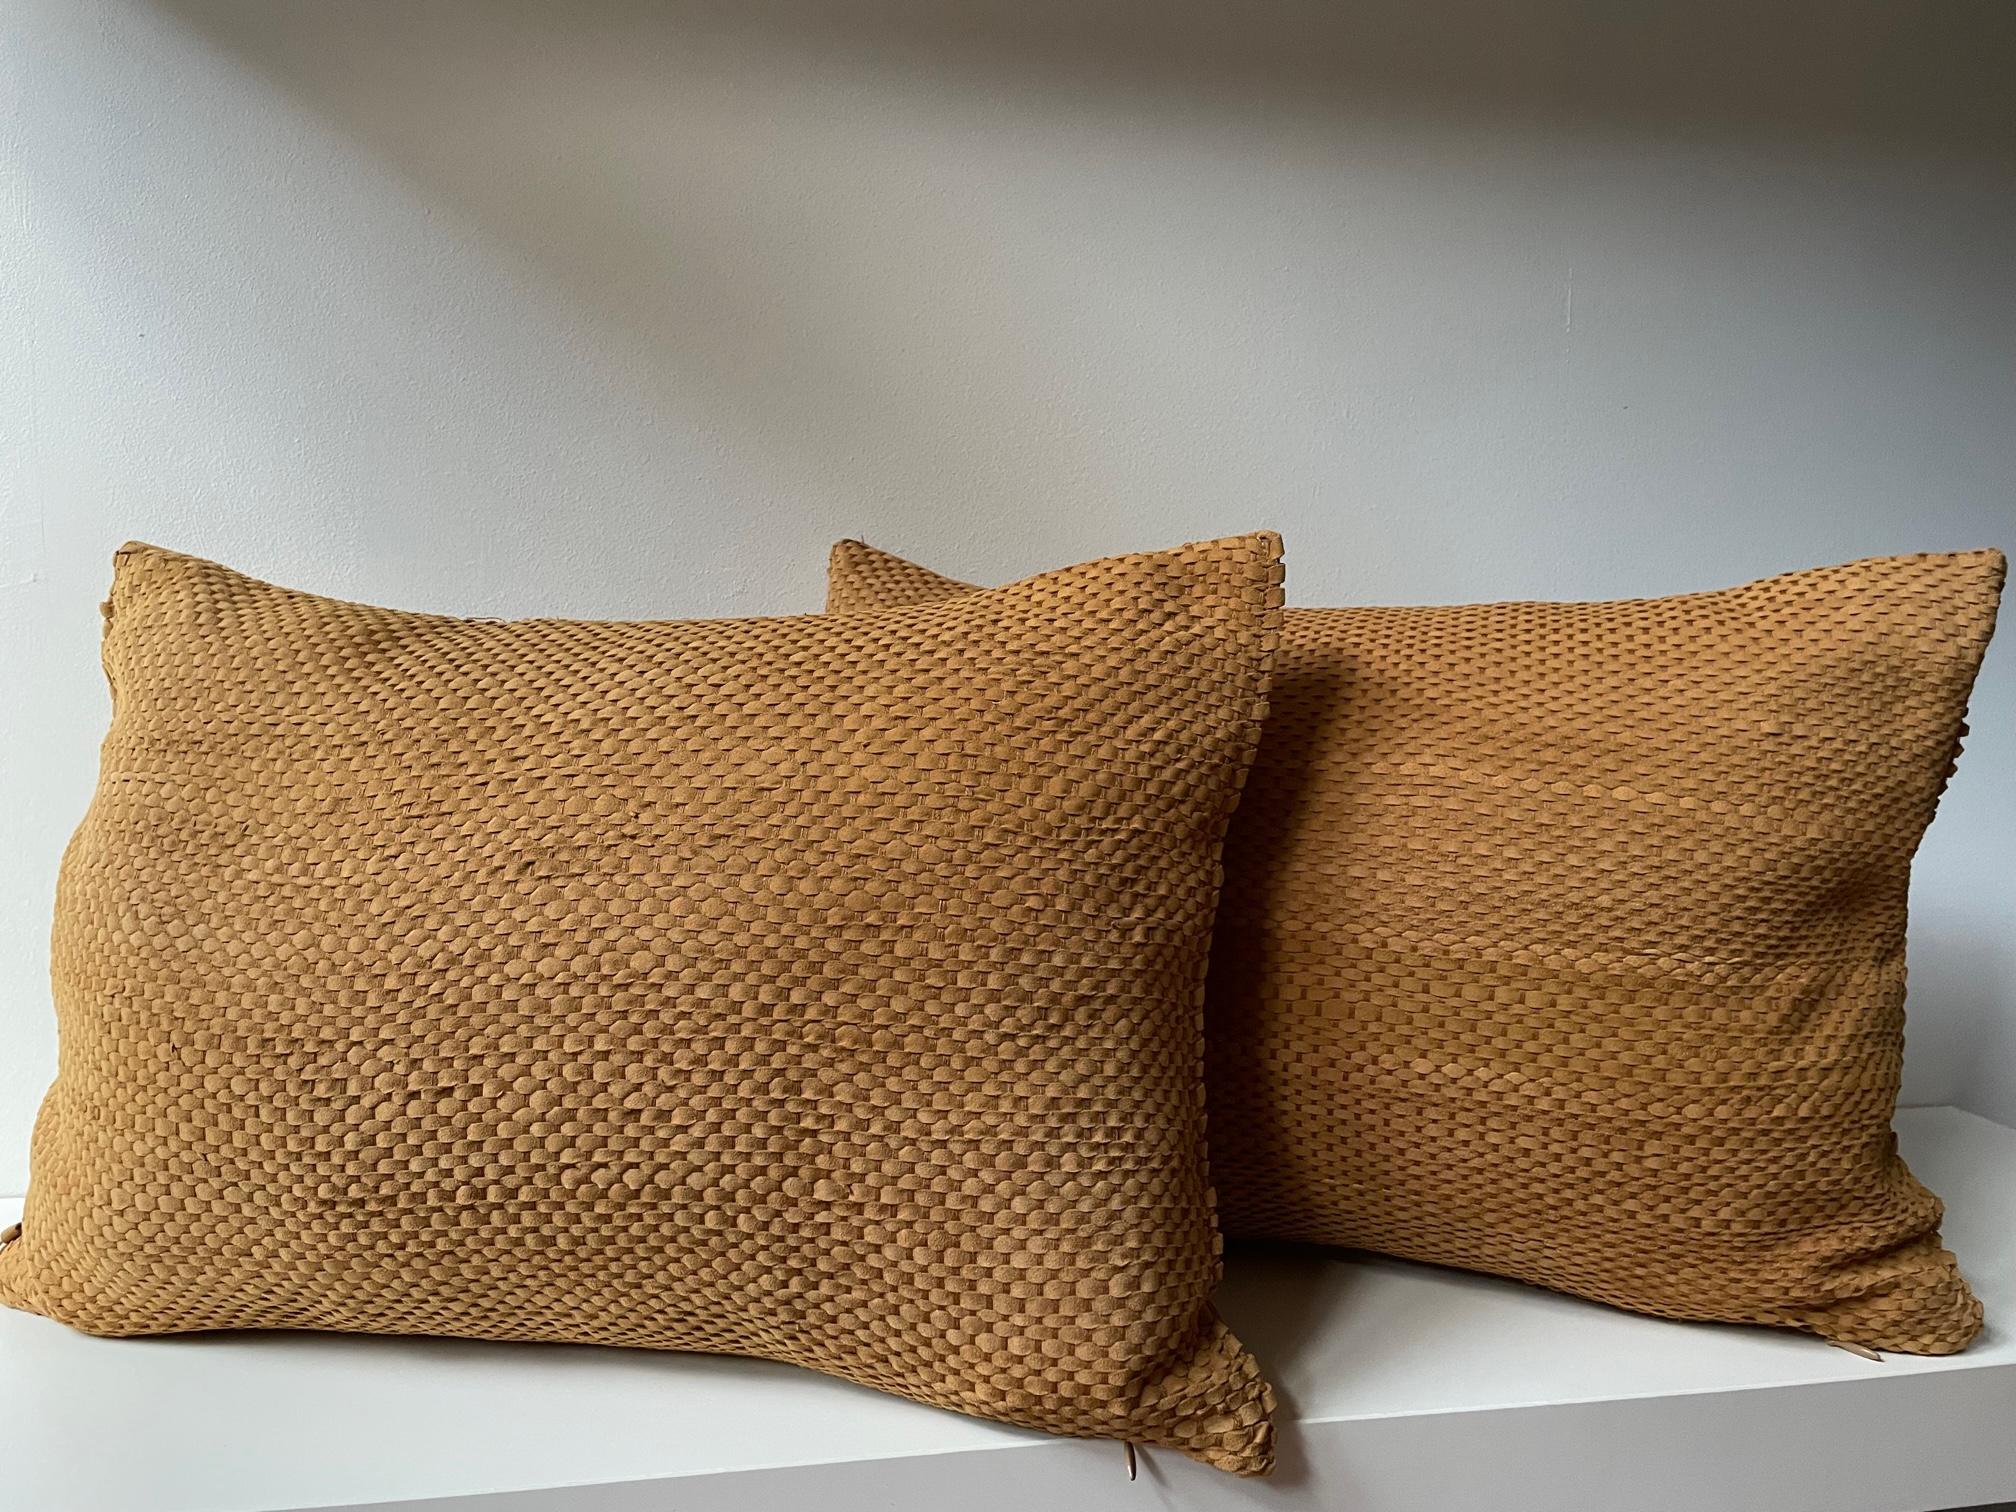 1 Pair hand woven suede cushion colour ginger, back side with suede, cushion size: 30 x 45 cm, silk lining, inner pad with new feathers.